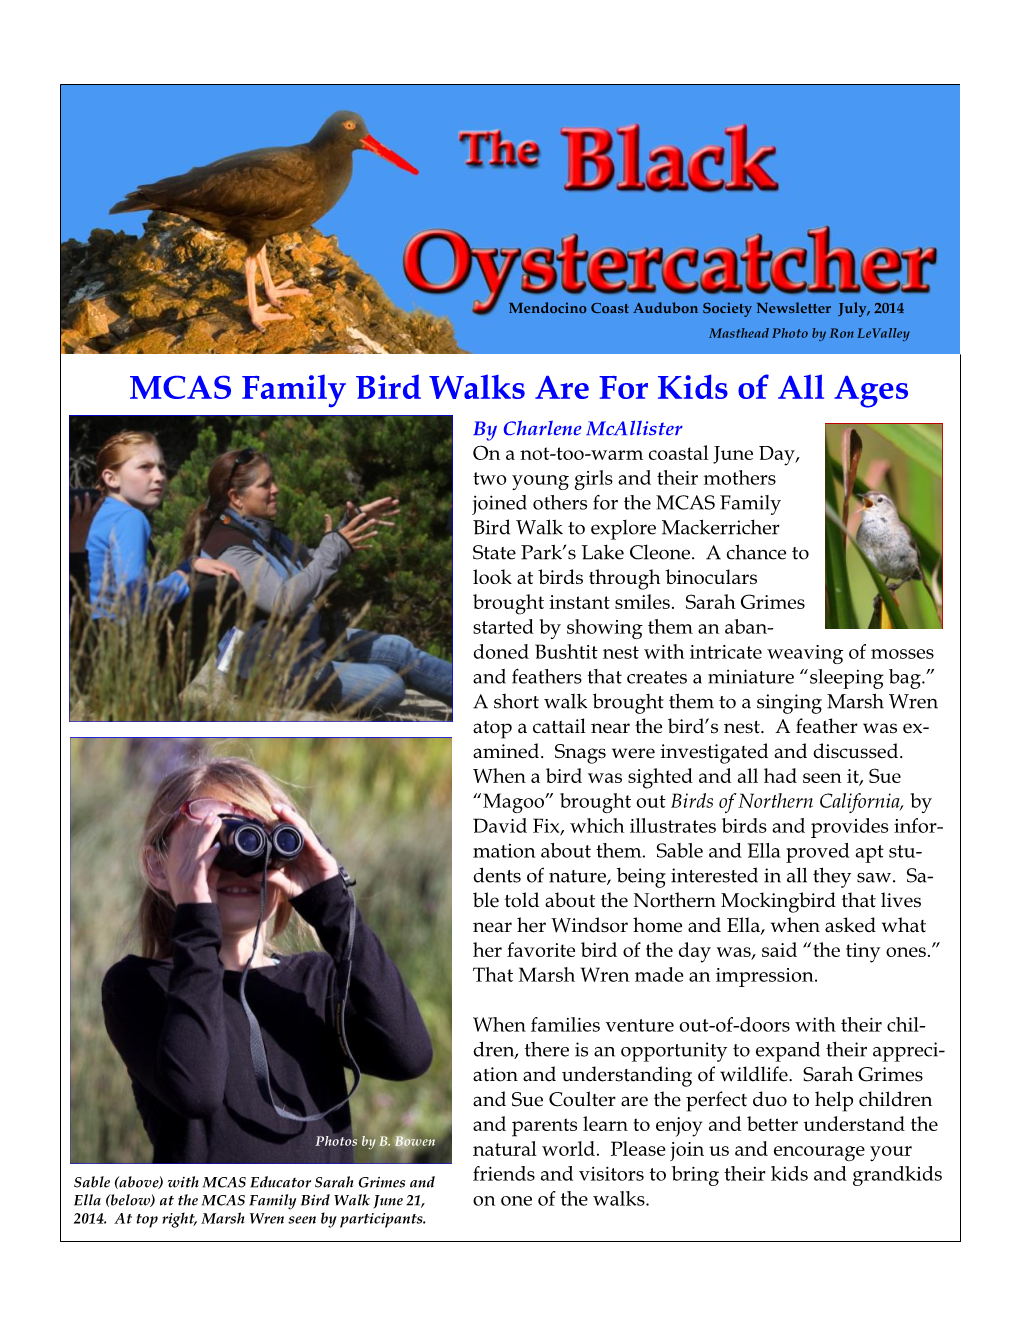 MCAS Family Bird Walks Are for Kids of All Ages